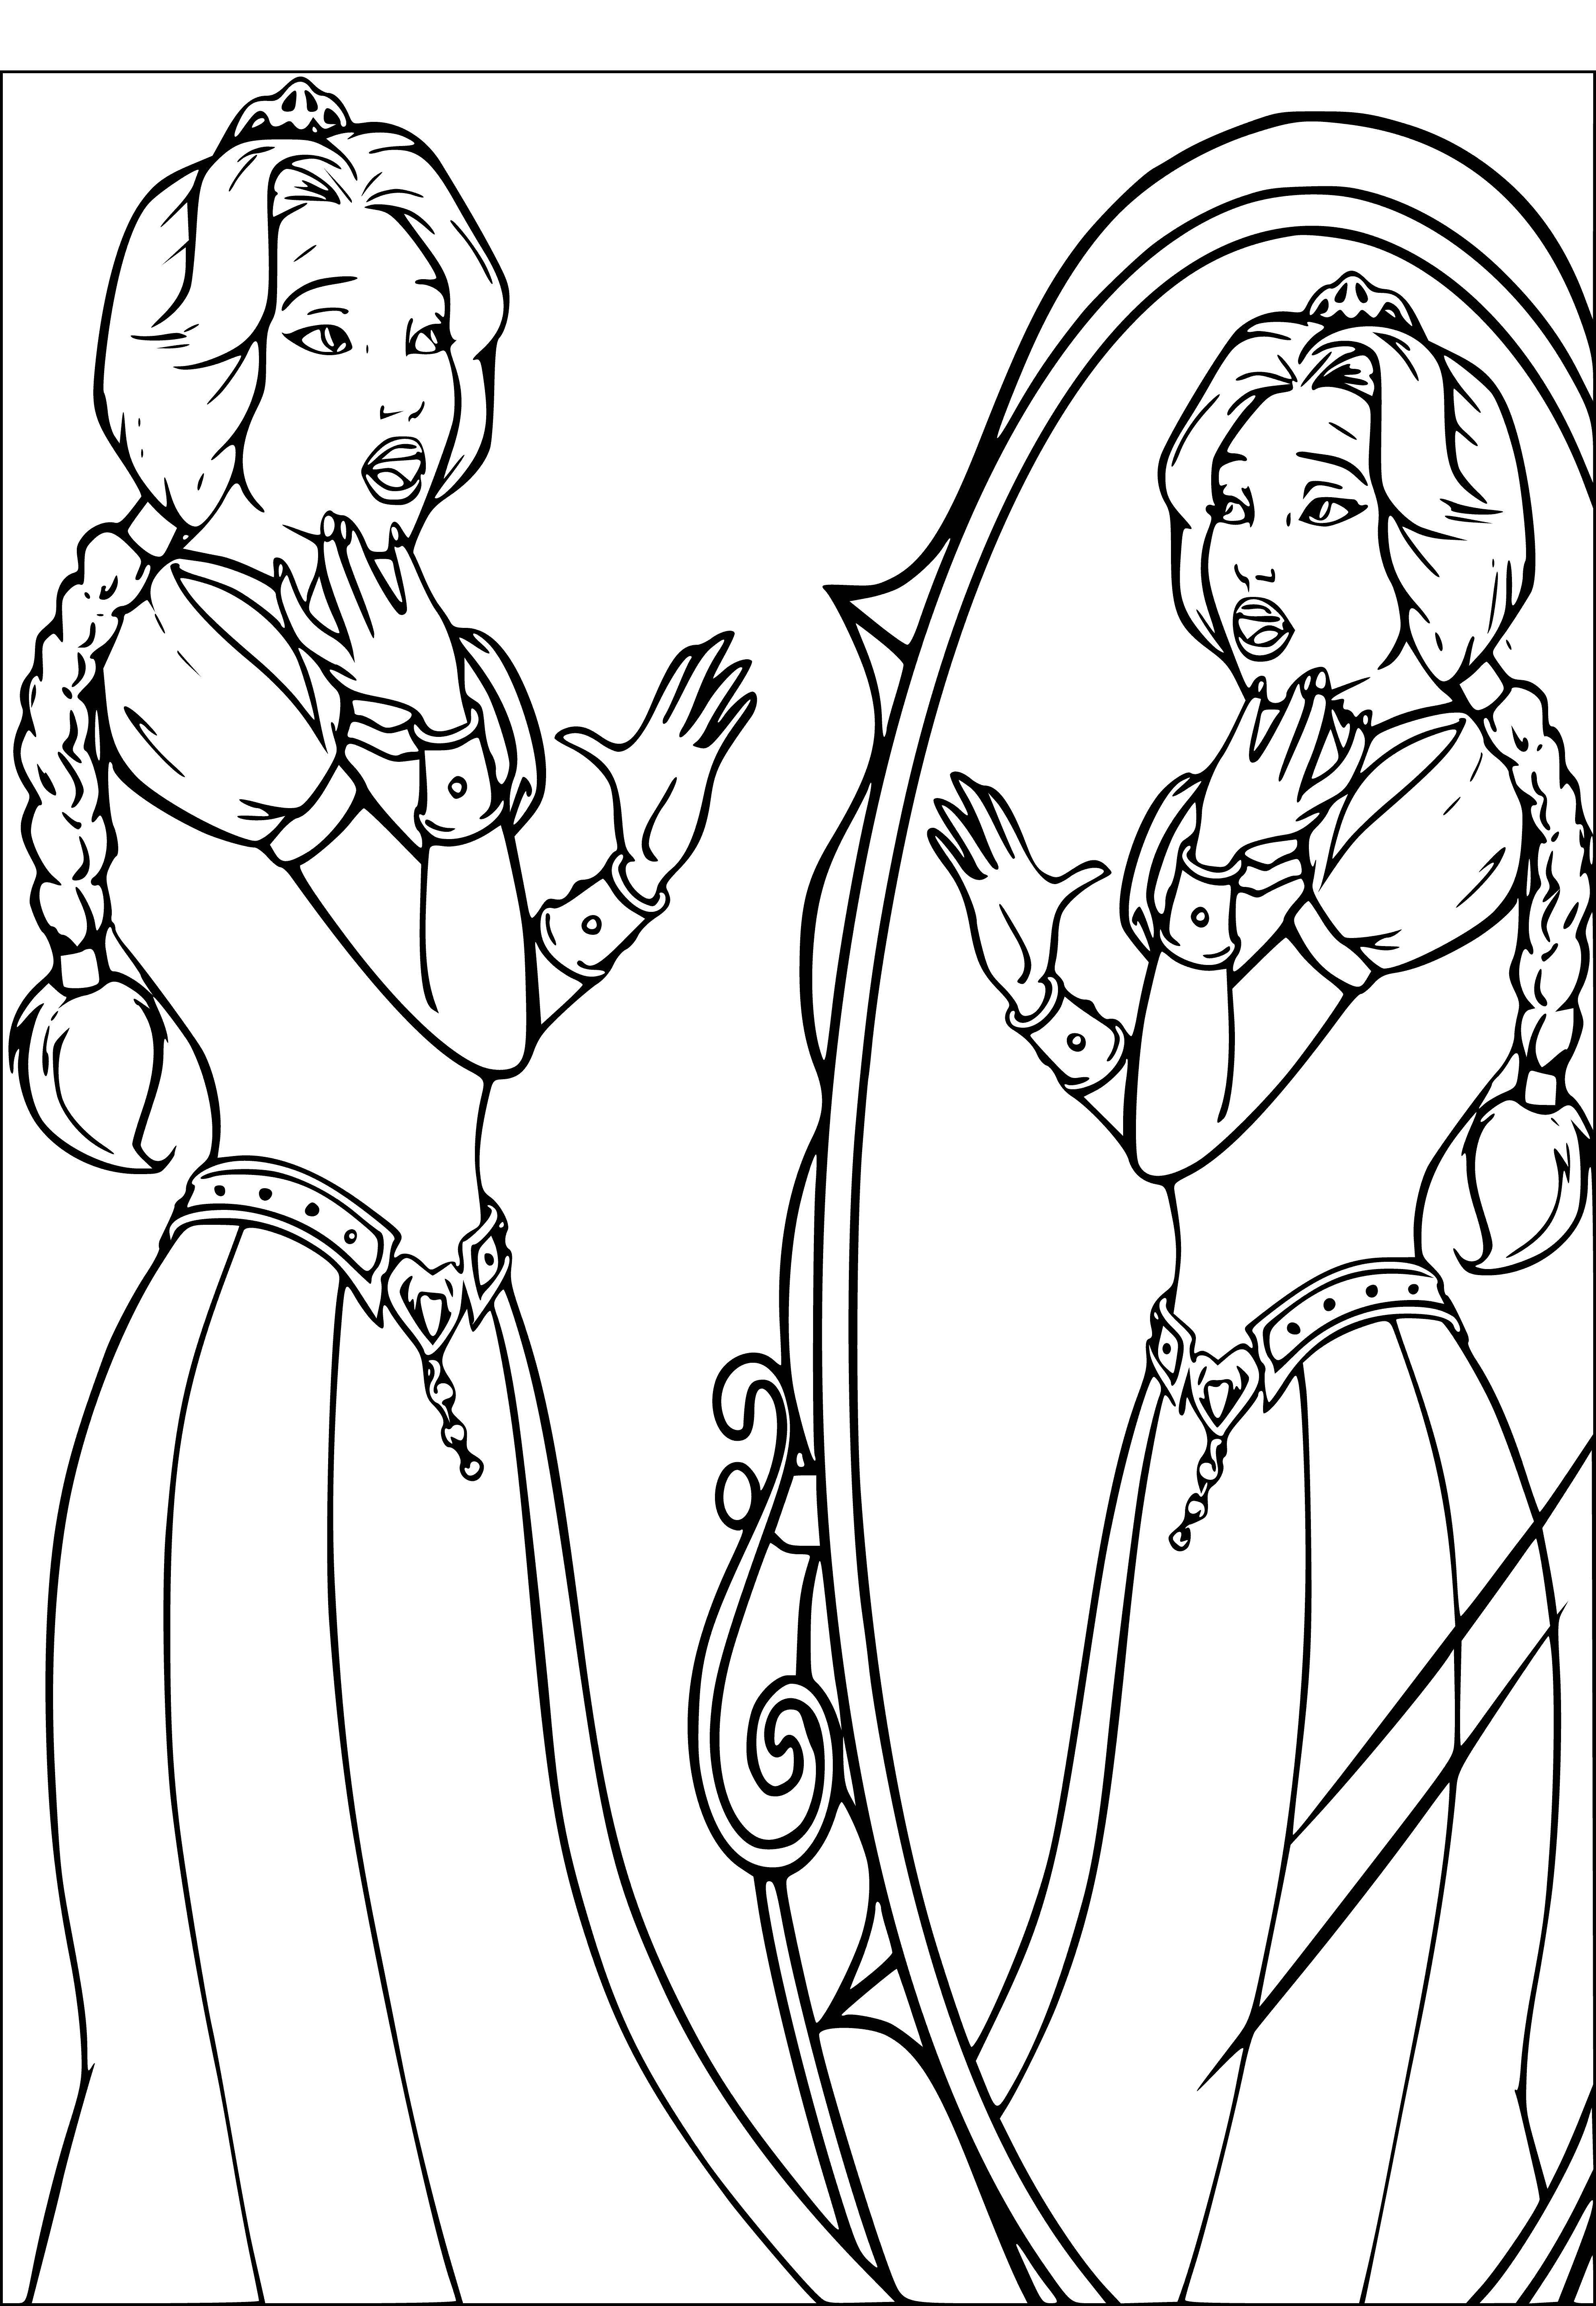 coloring page: Shrek and Princess Fiona stand in view of a castle, facing each other with a donkey behind him & her crwned beauty clad in pink behind her.